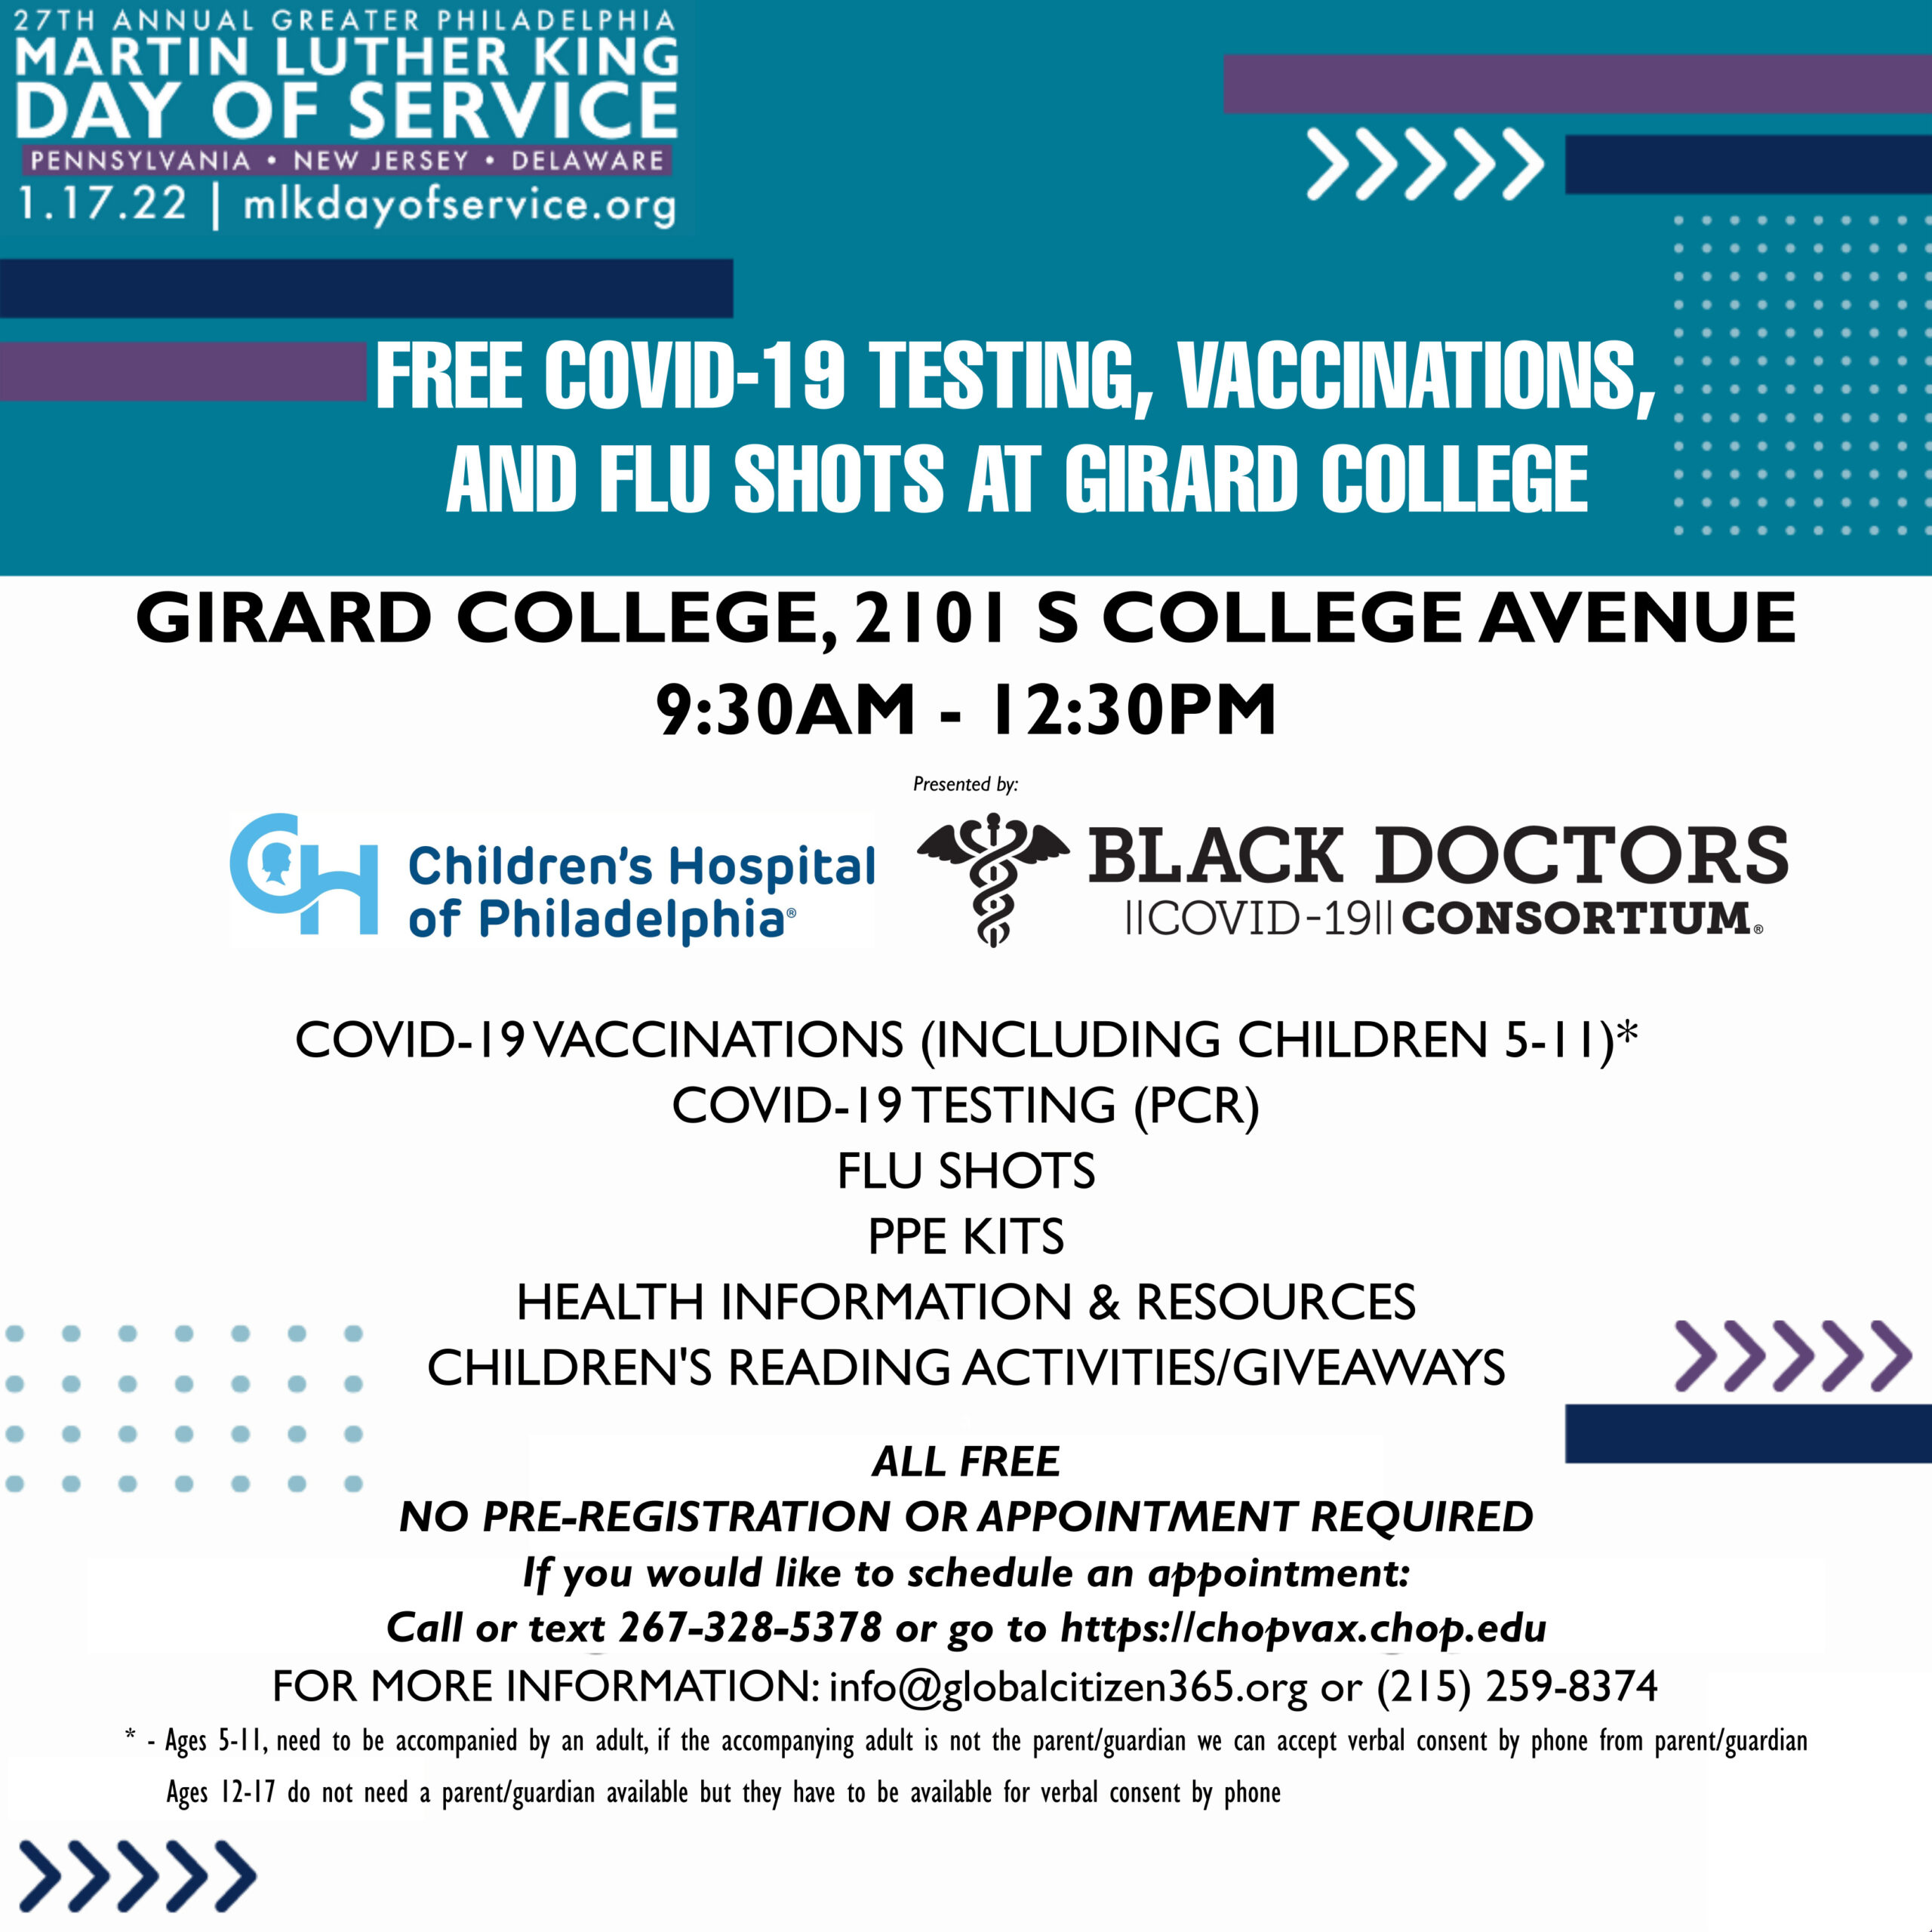 COVID testing and vaccination clinics